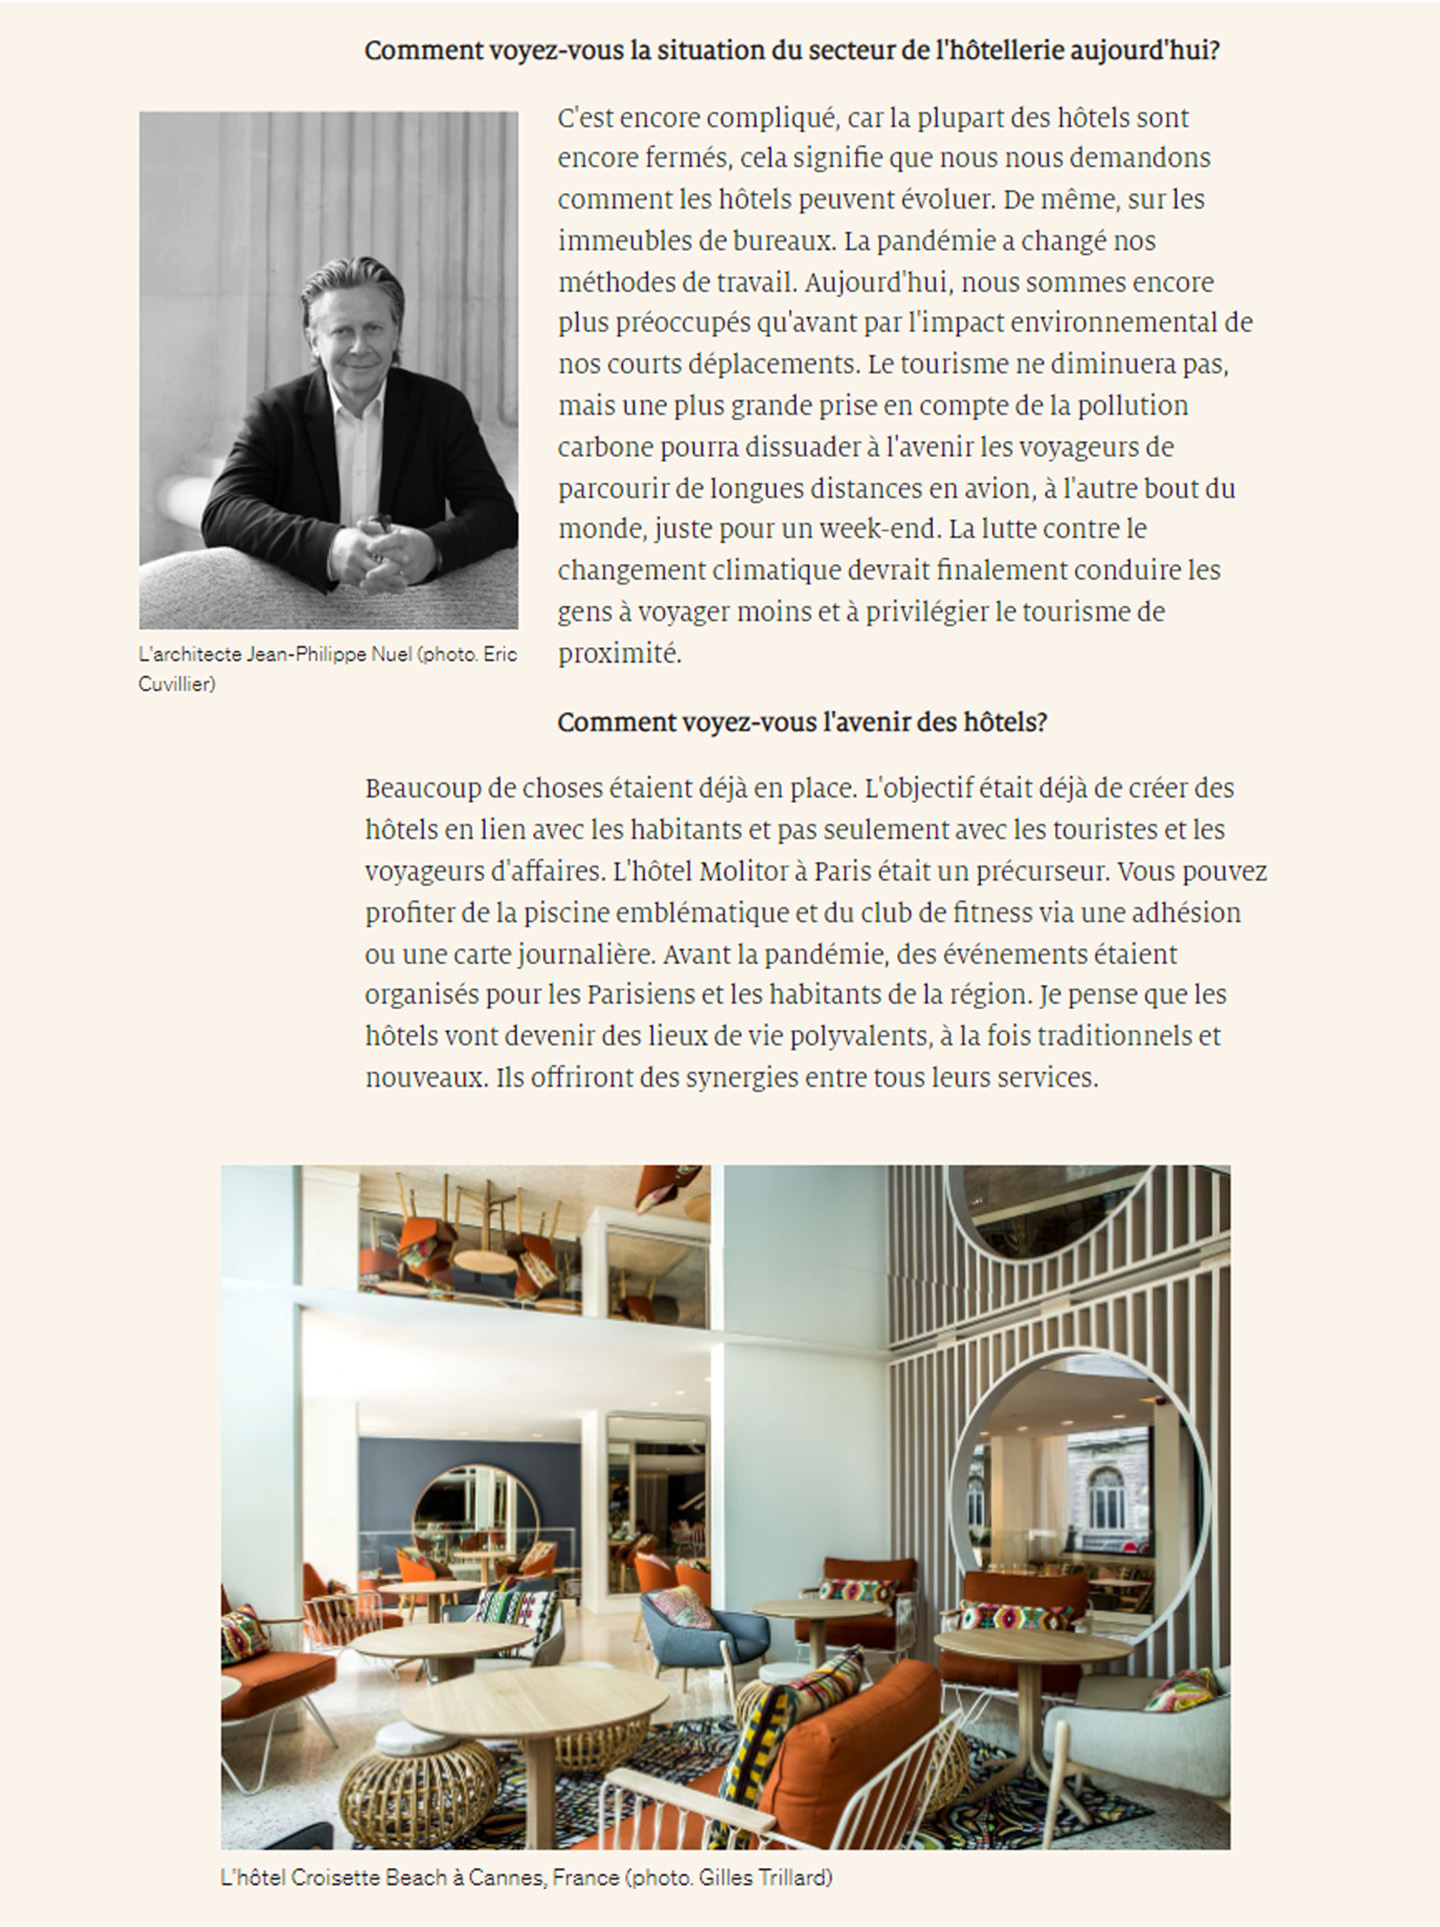 Article in Luxury tribune about jean-philippe nuel studio and the future of the hotel industry, interior design in the luxury hotel industry